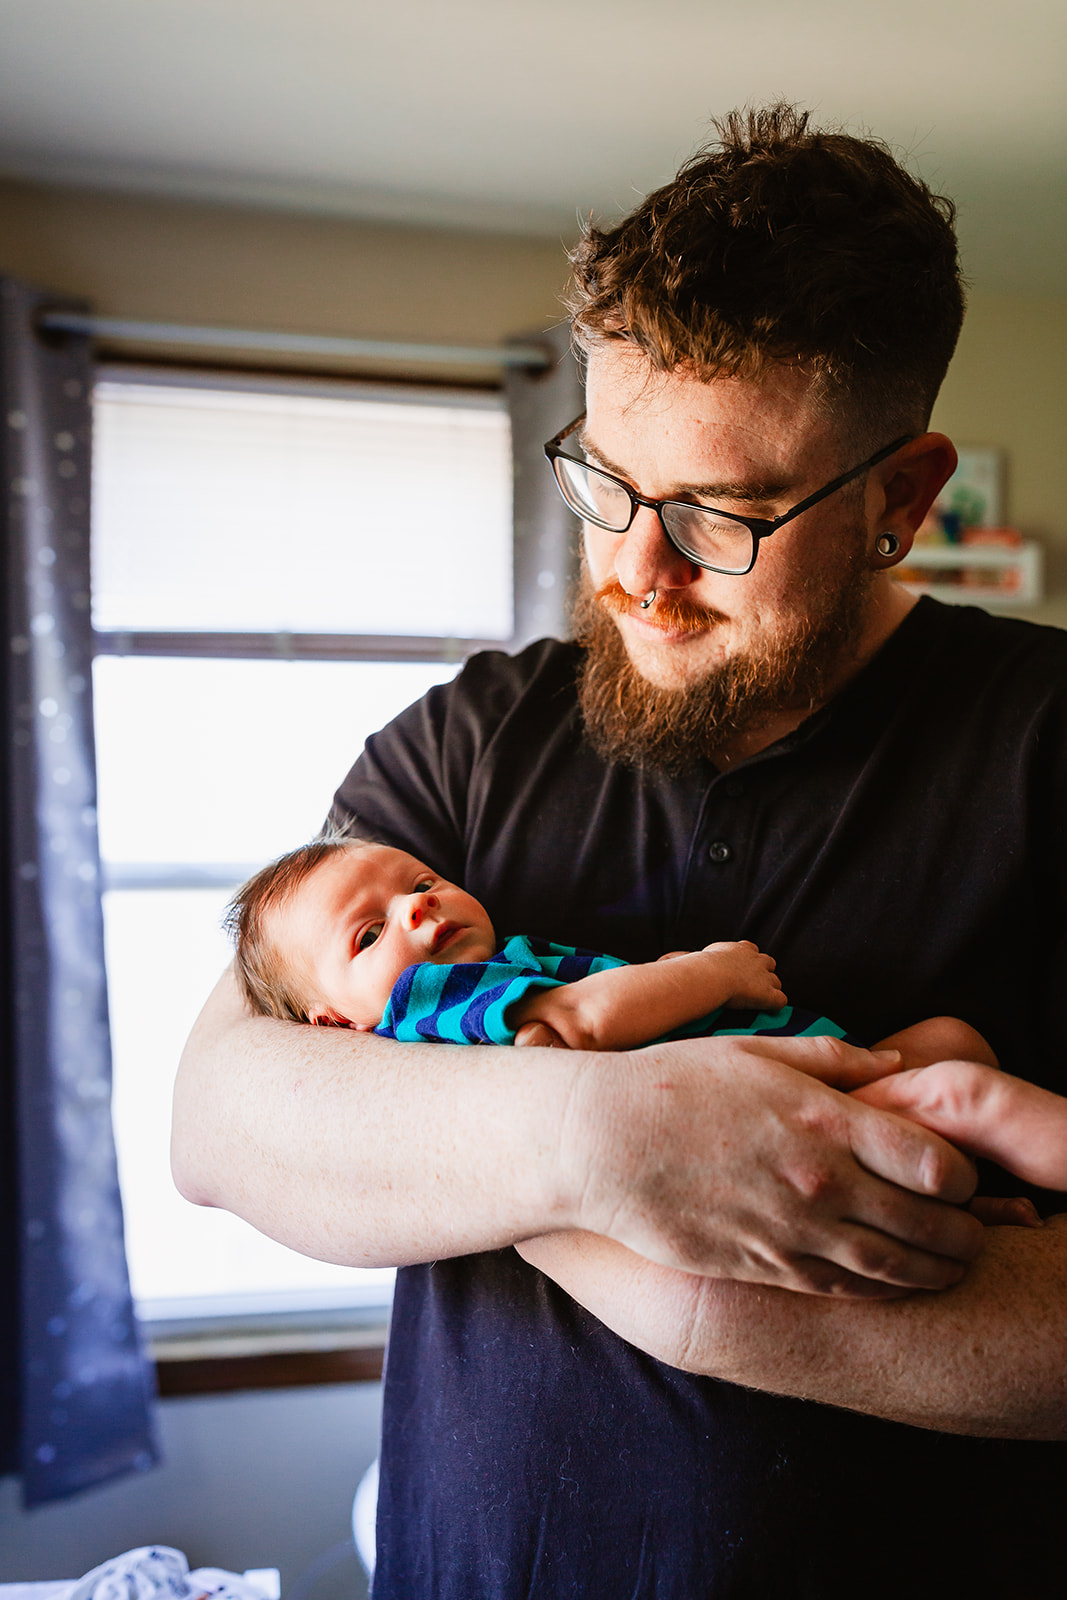 In home lifestyle newborn session in Columbus Ohio by Christy Rice Photography